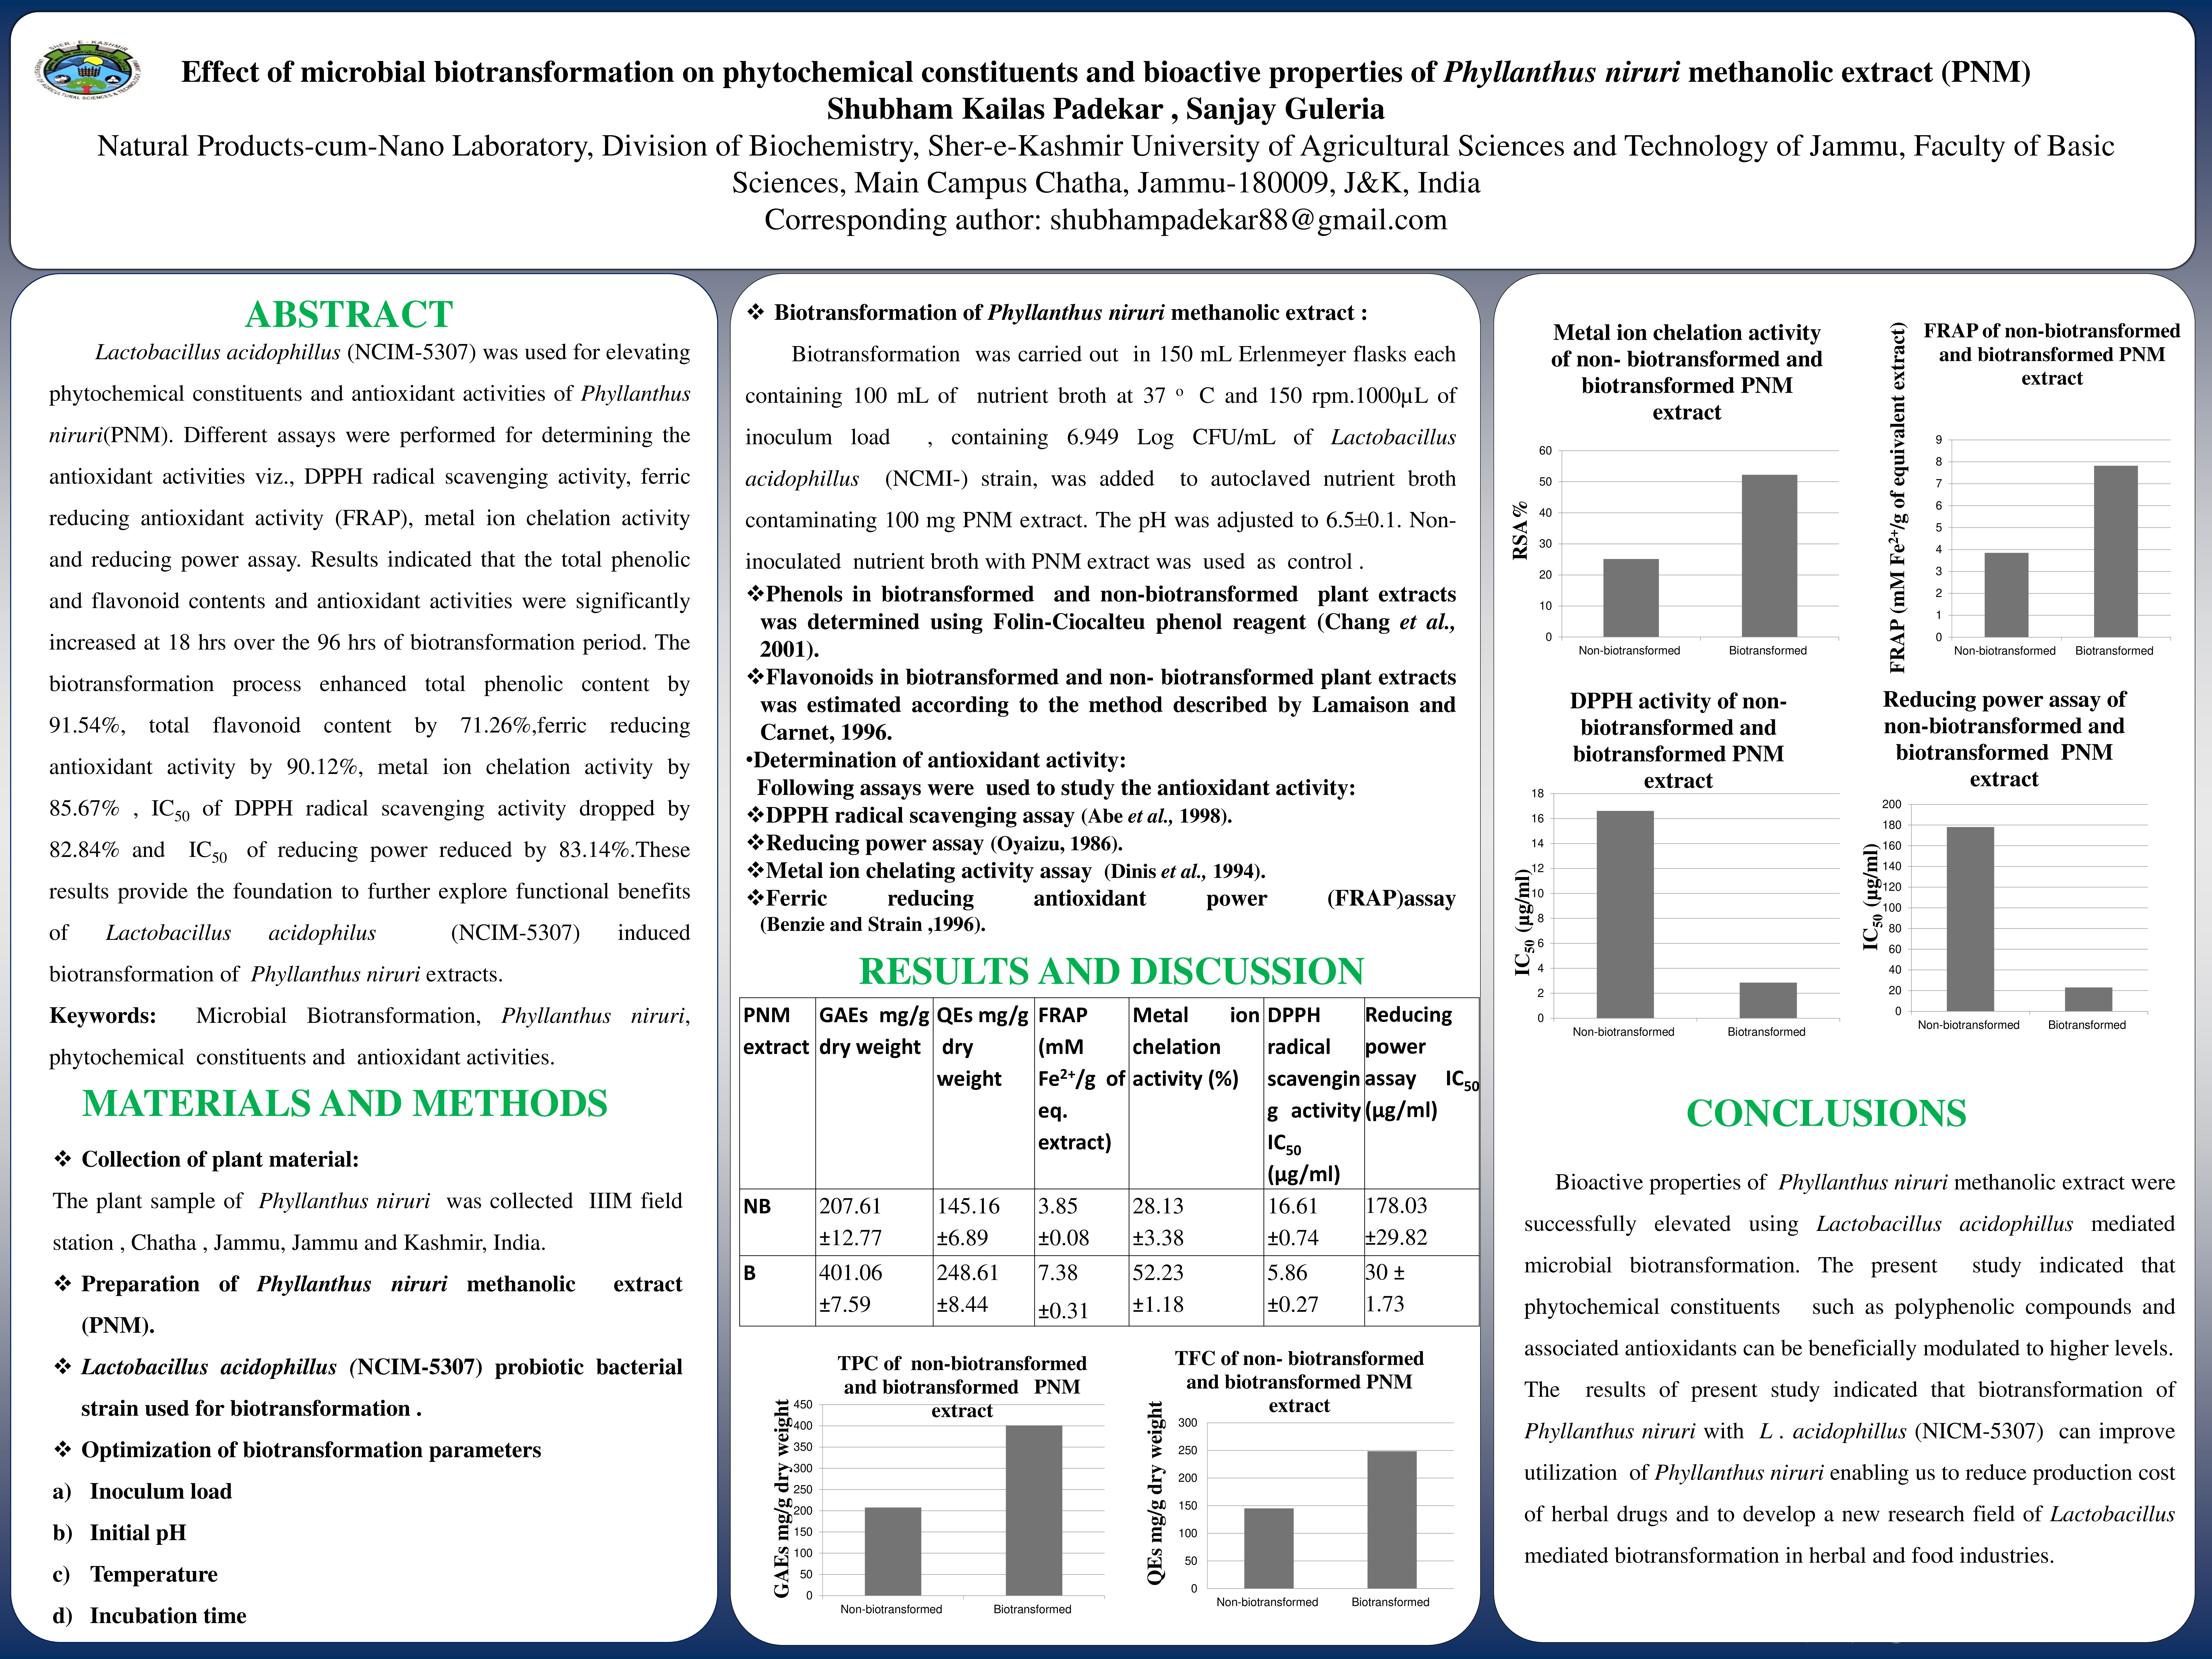 Effect of microbial biotransformation on phytochemical constituents and bioactive properties of Phyllanthus niruri methanolic extract (PNM) 